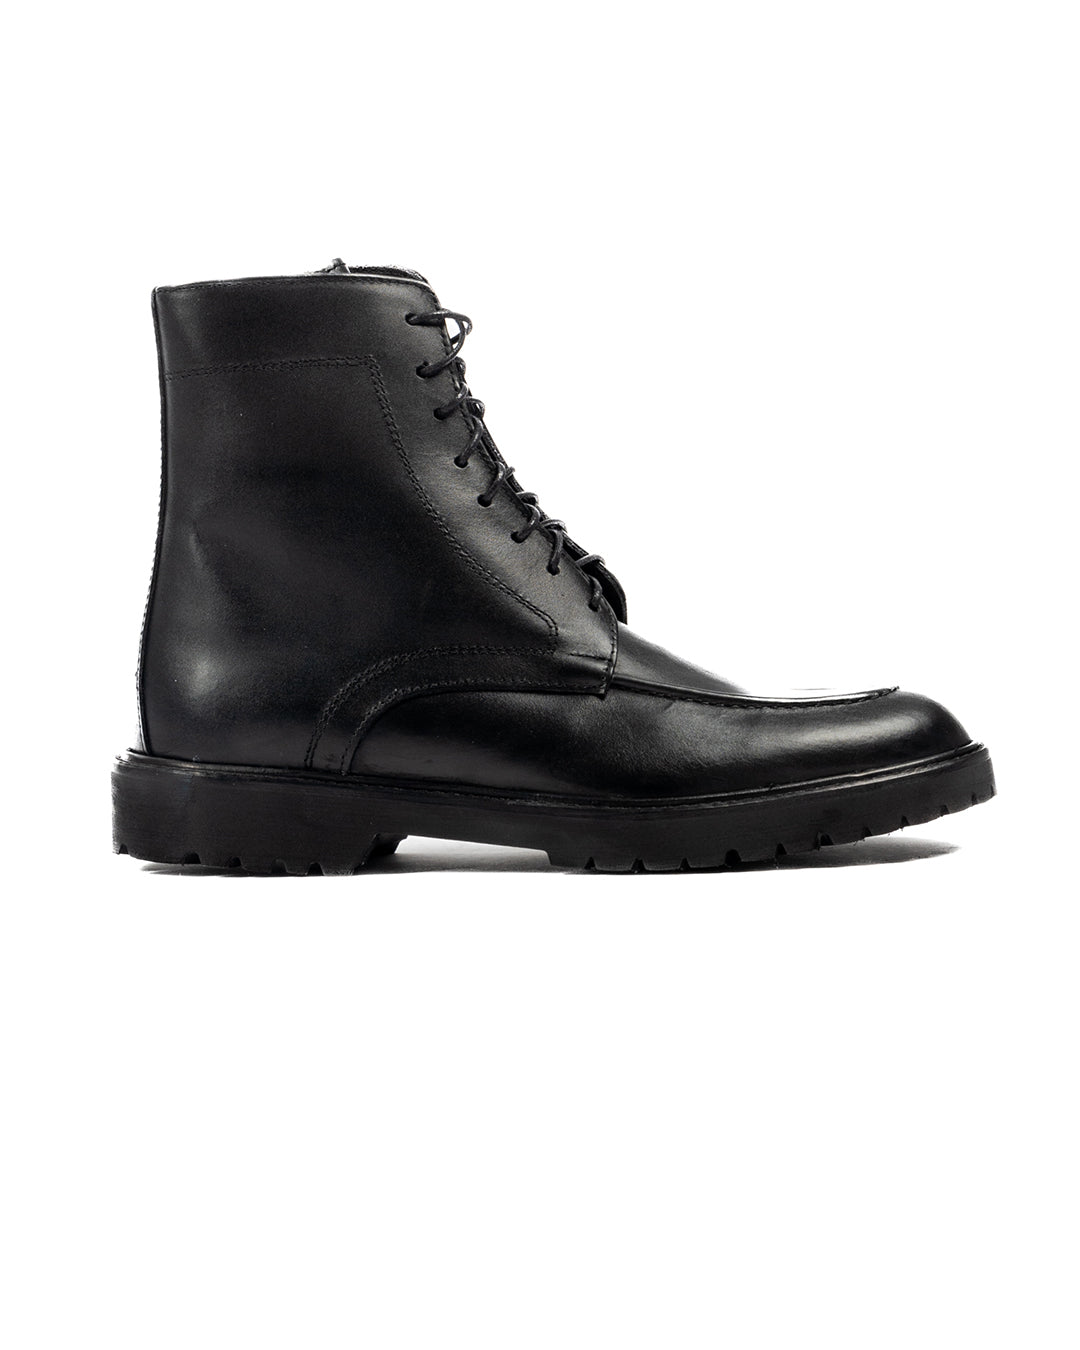 Astron - black leather boot